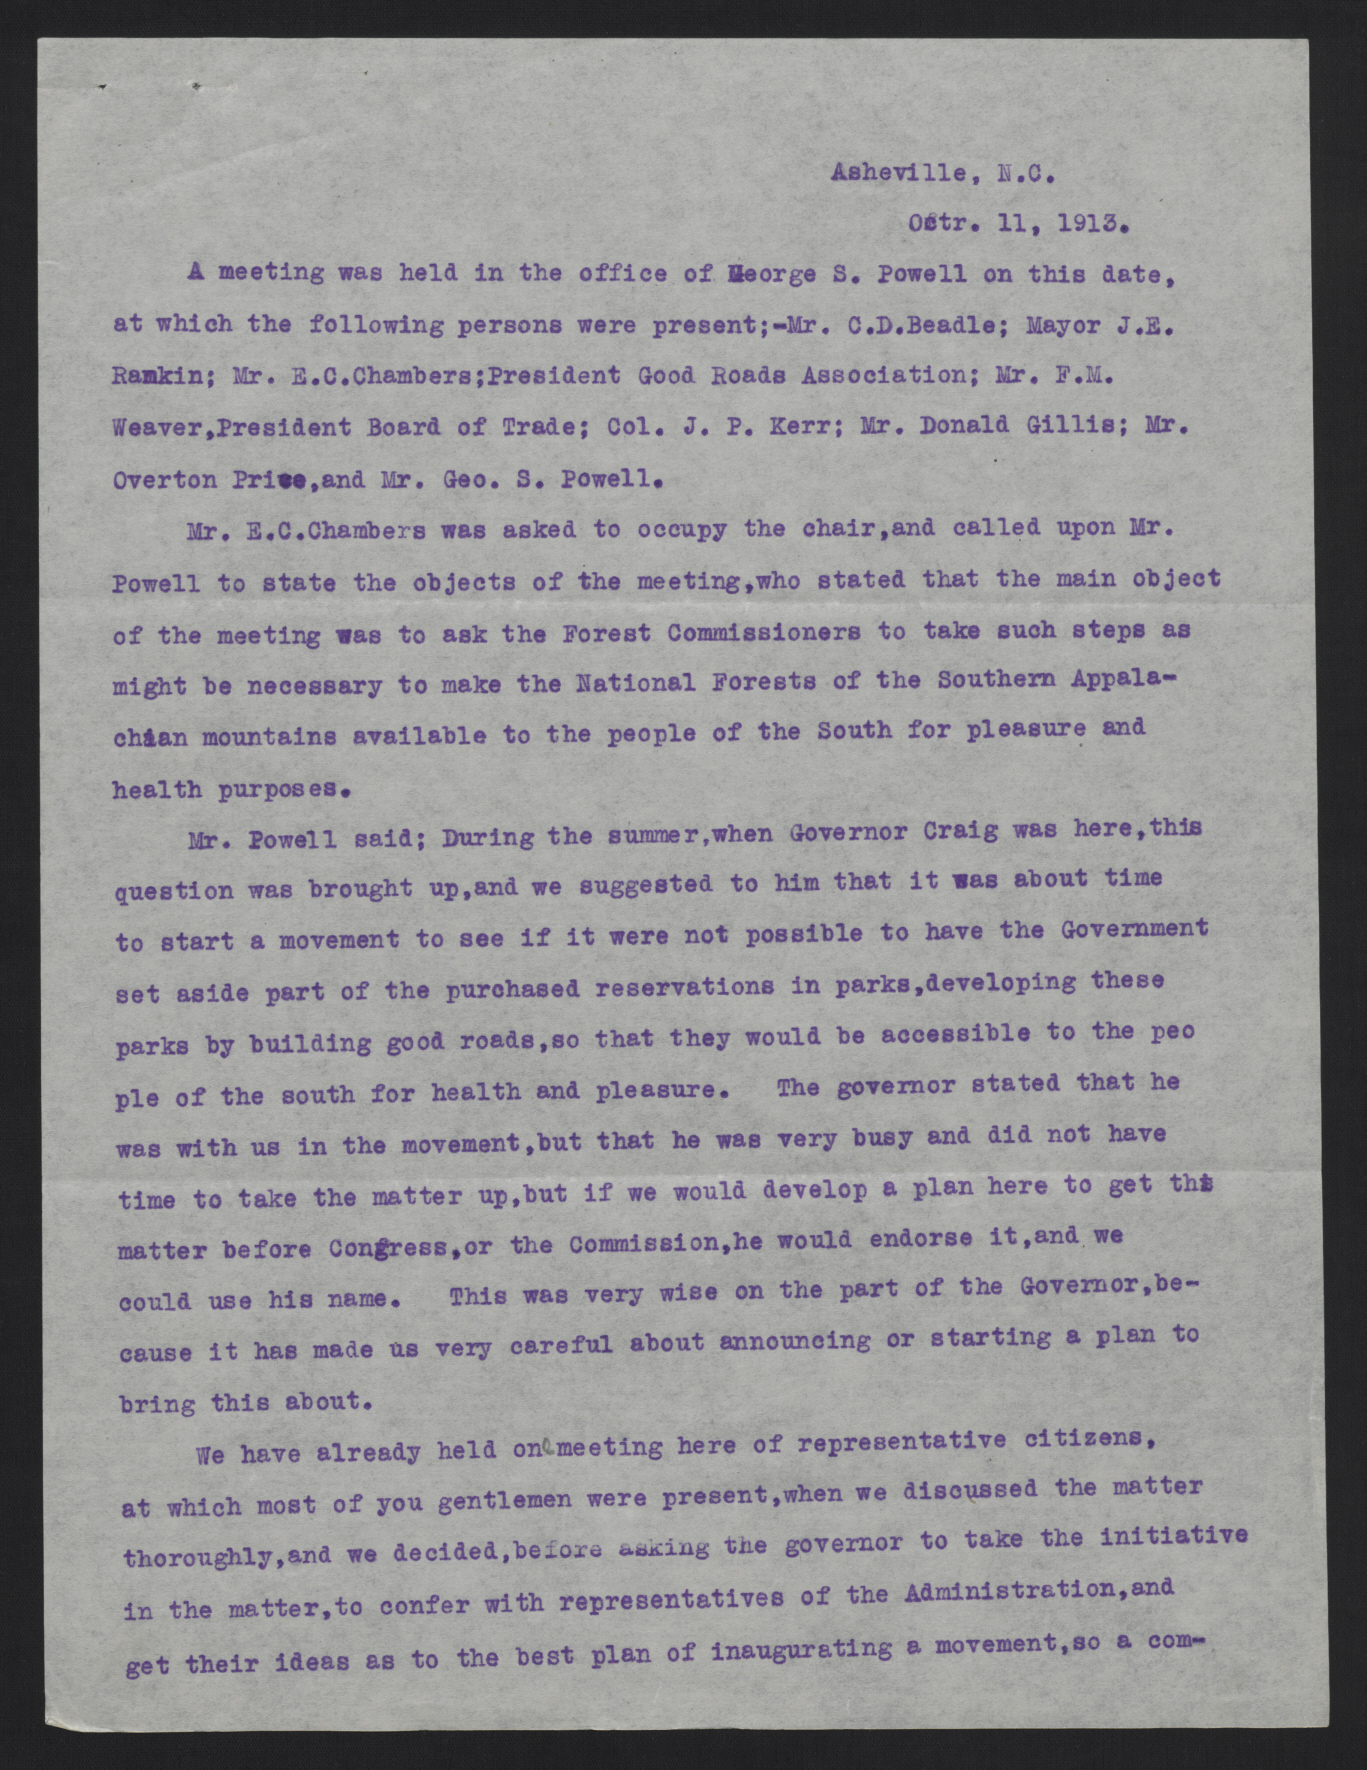 Meeting Minutes of the Greater Western North Carolina Association, 11 October 1913, page 1